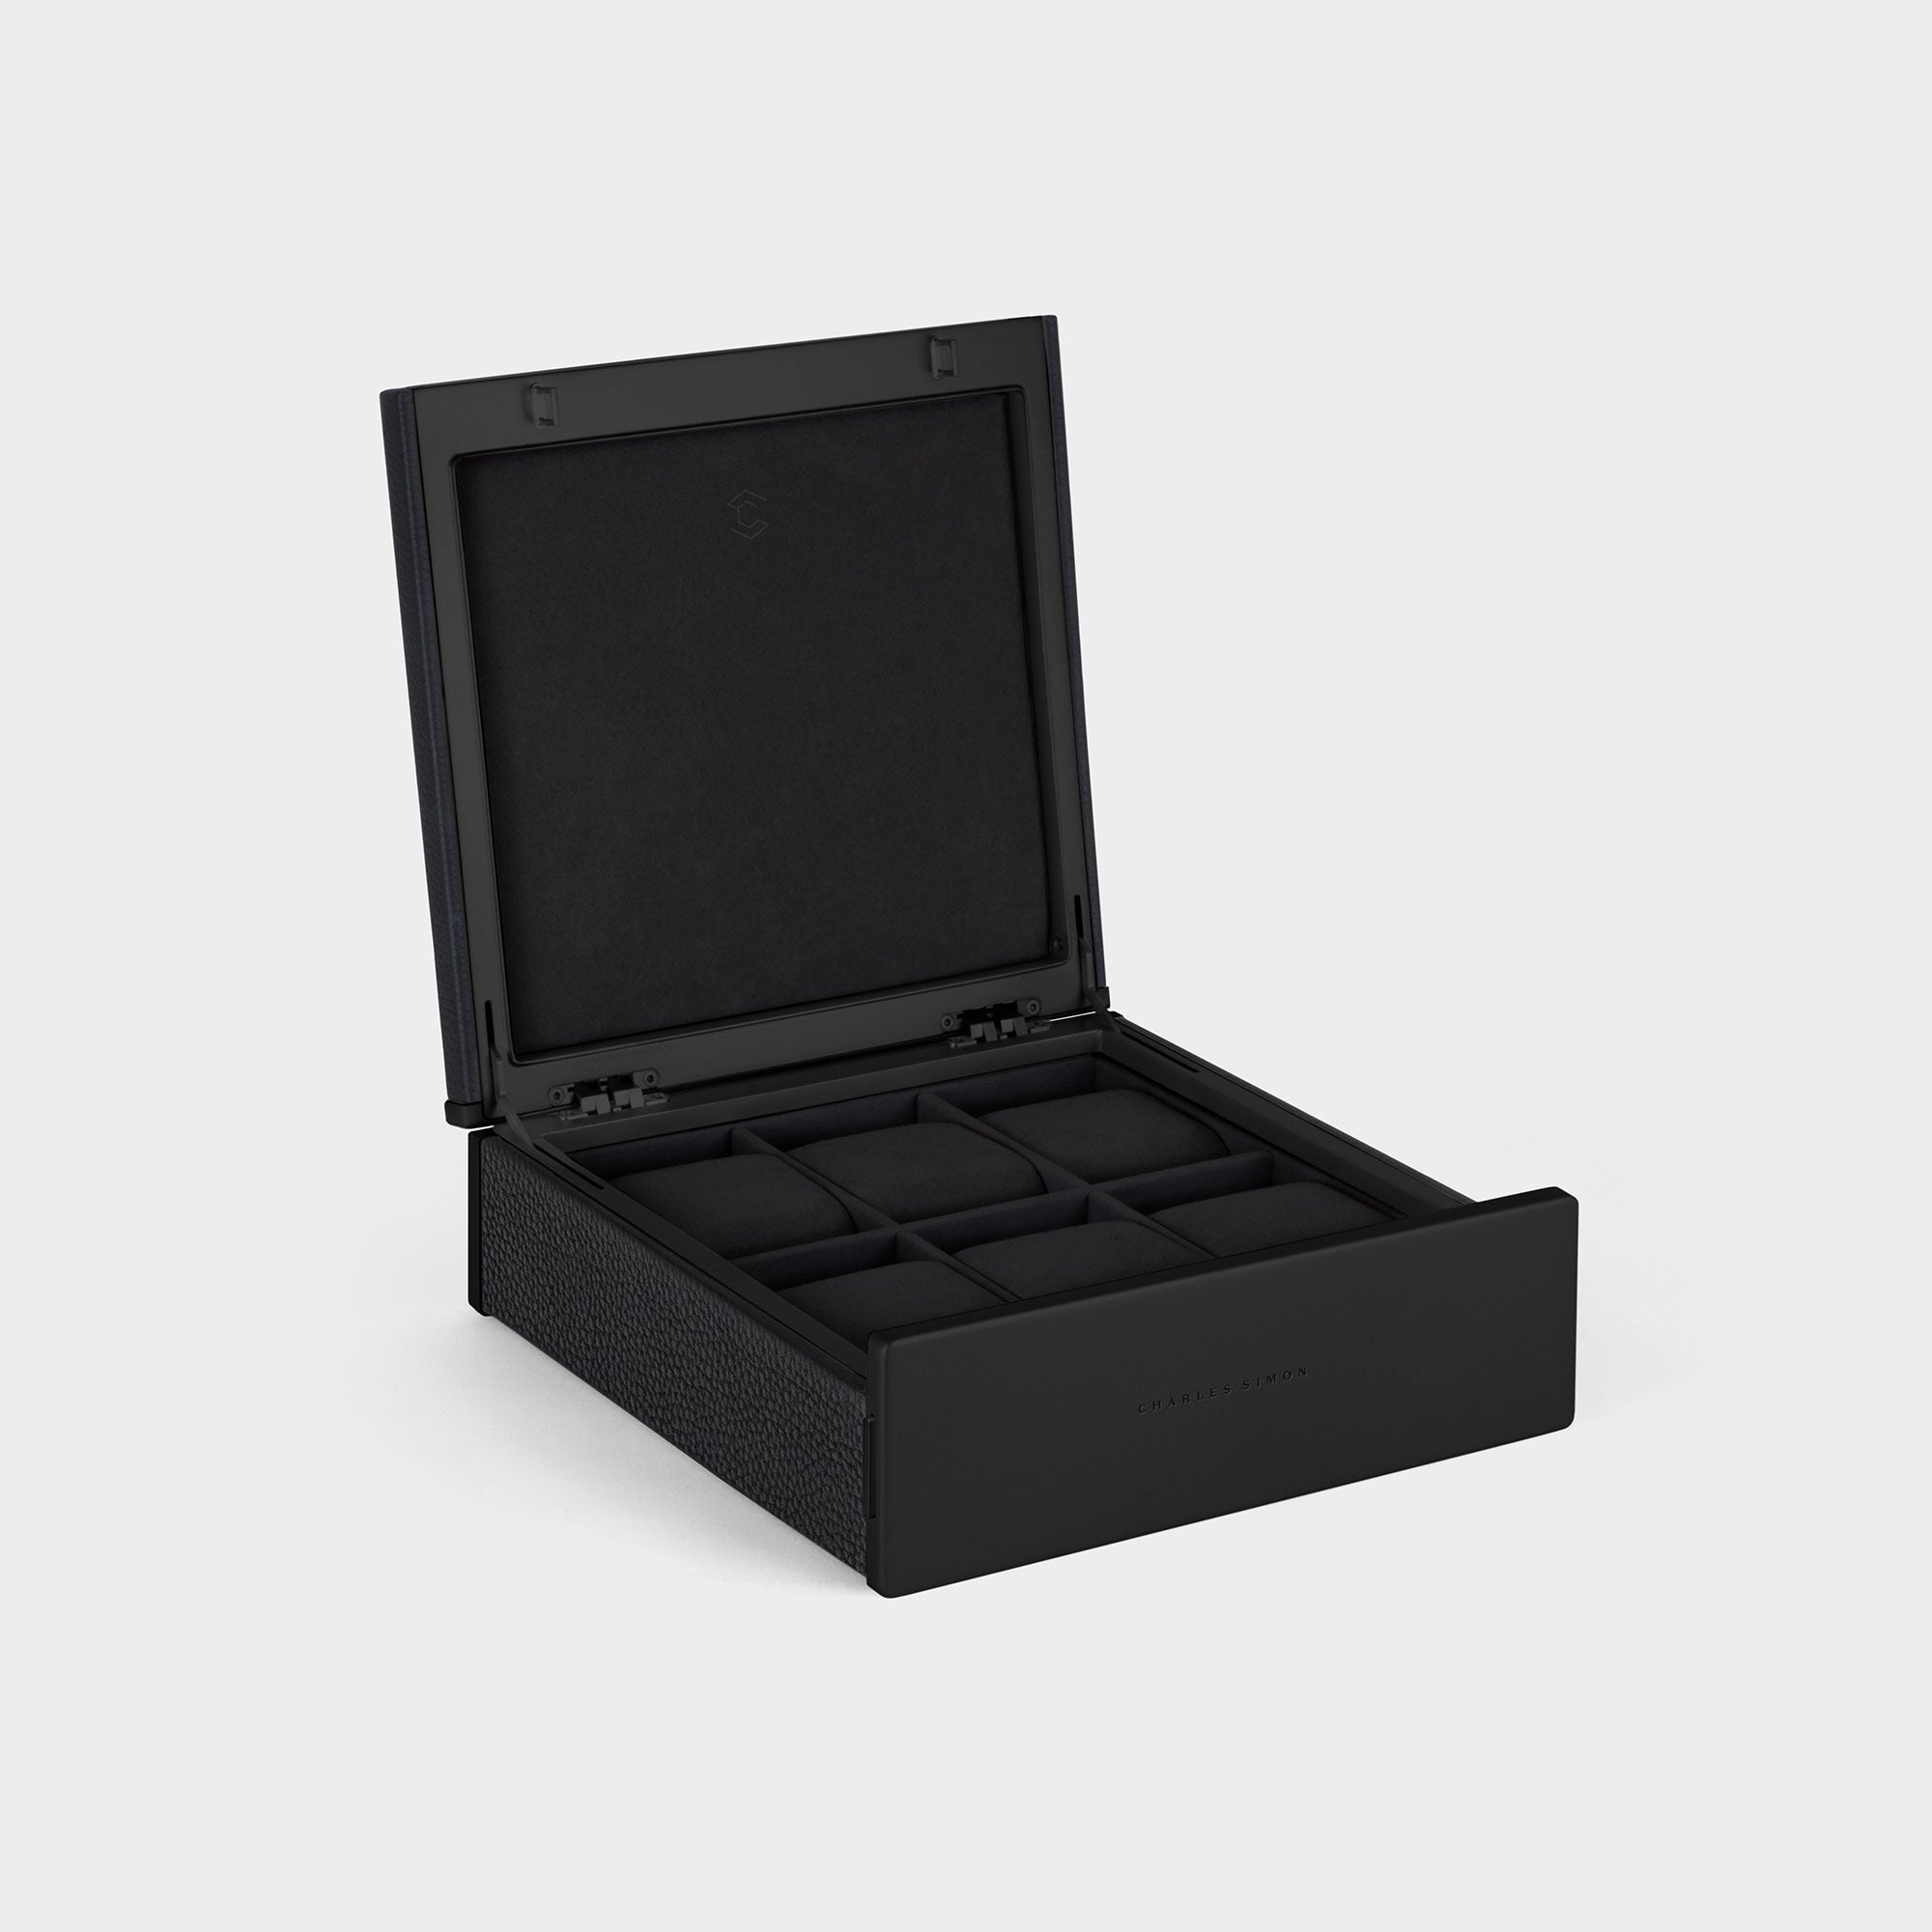 Handmade watch box for 6 watches in black leather, carbon fiber and anodized aluminum casing and Notte Alcantara interior